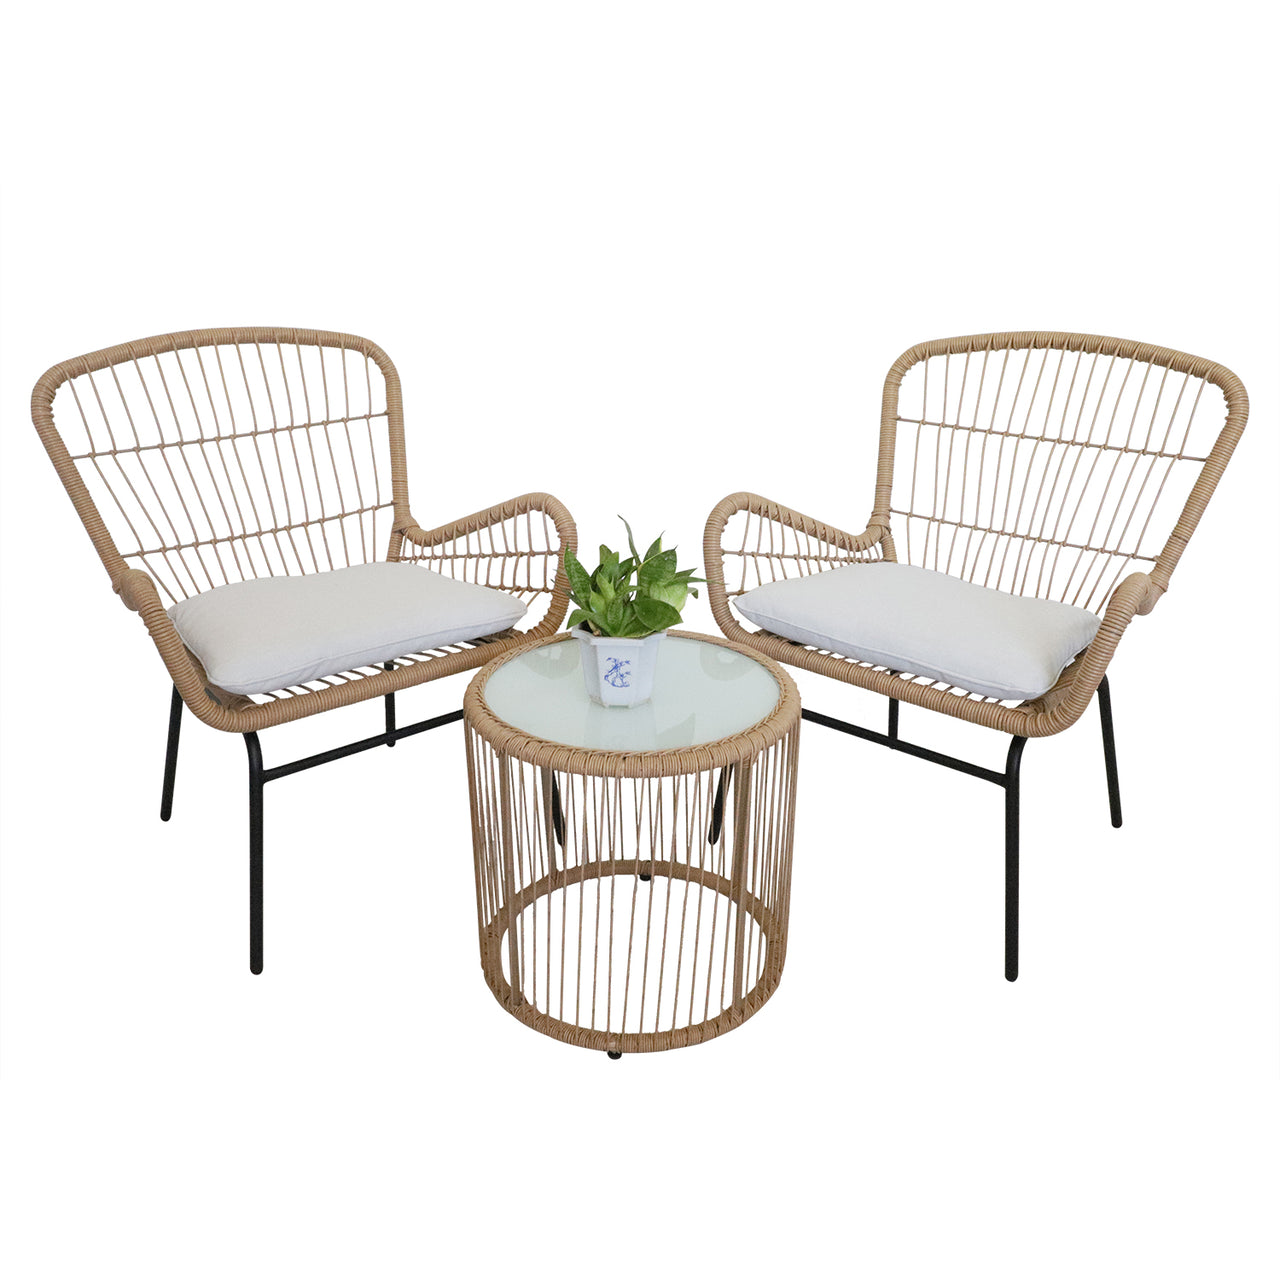 Balcony Furniture, 3 Piece Patio Set, Outdoor Wicker Chairs with Glass Top Table and Soft Cushion, Rattan Front Porch Furniture